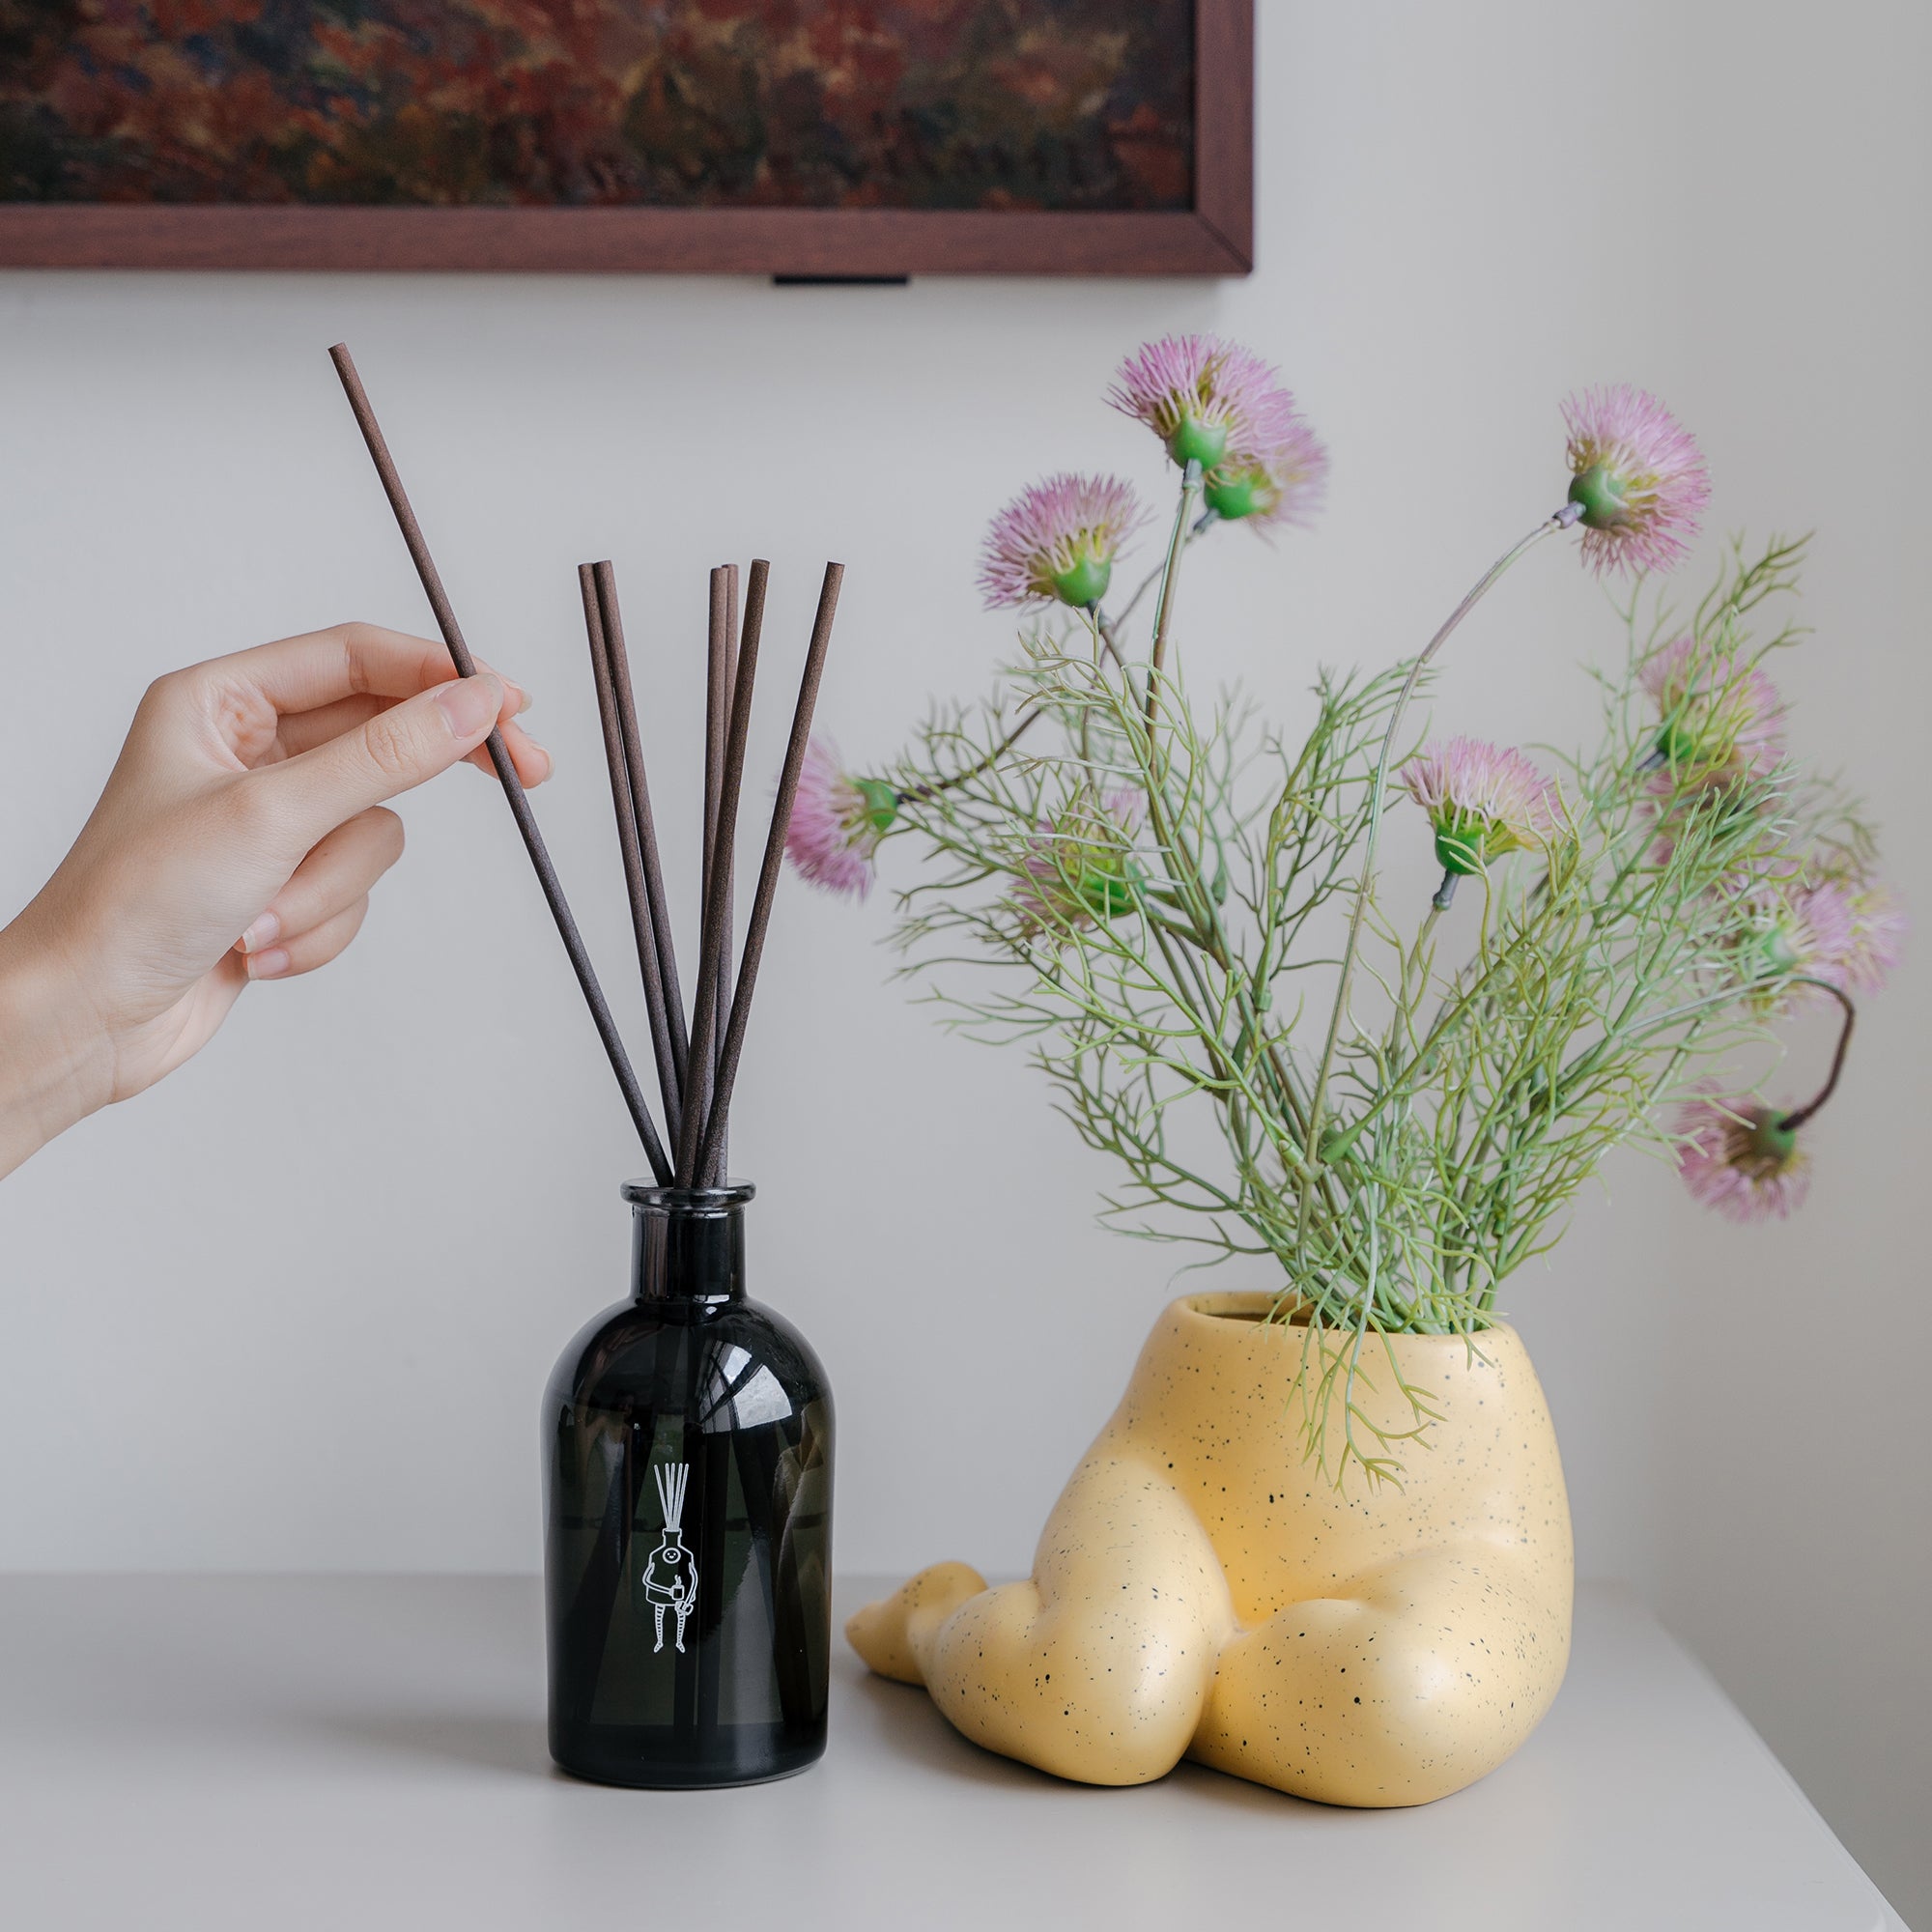 hand putting reed sticks into reed diffuser on tv console